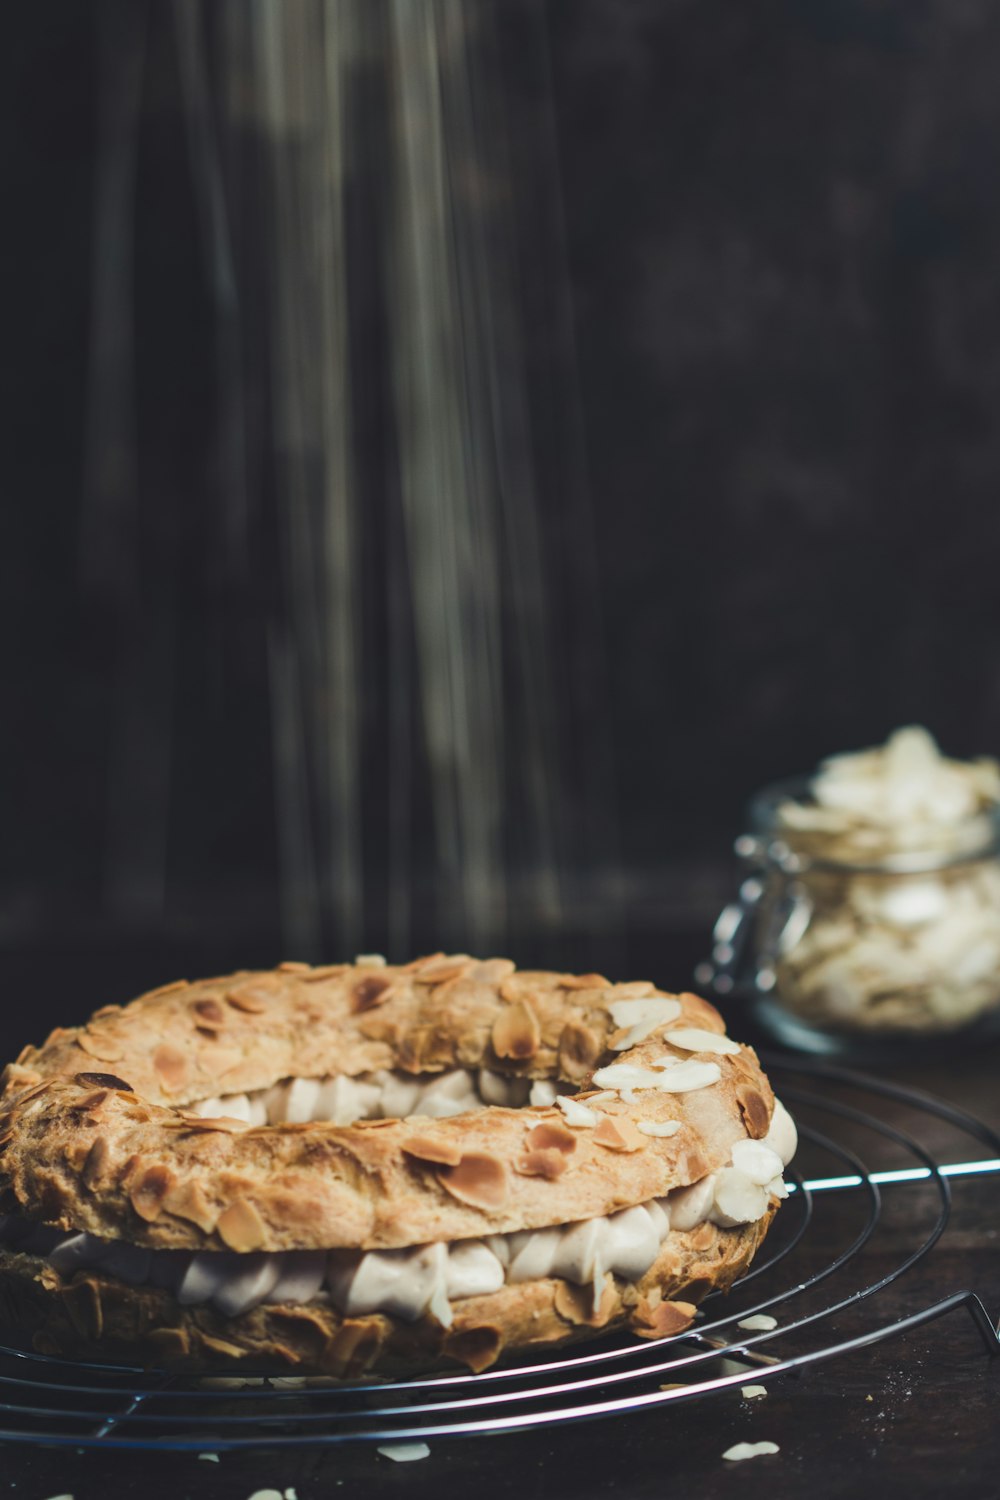 baked pastry on wire stand